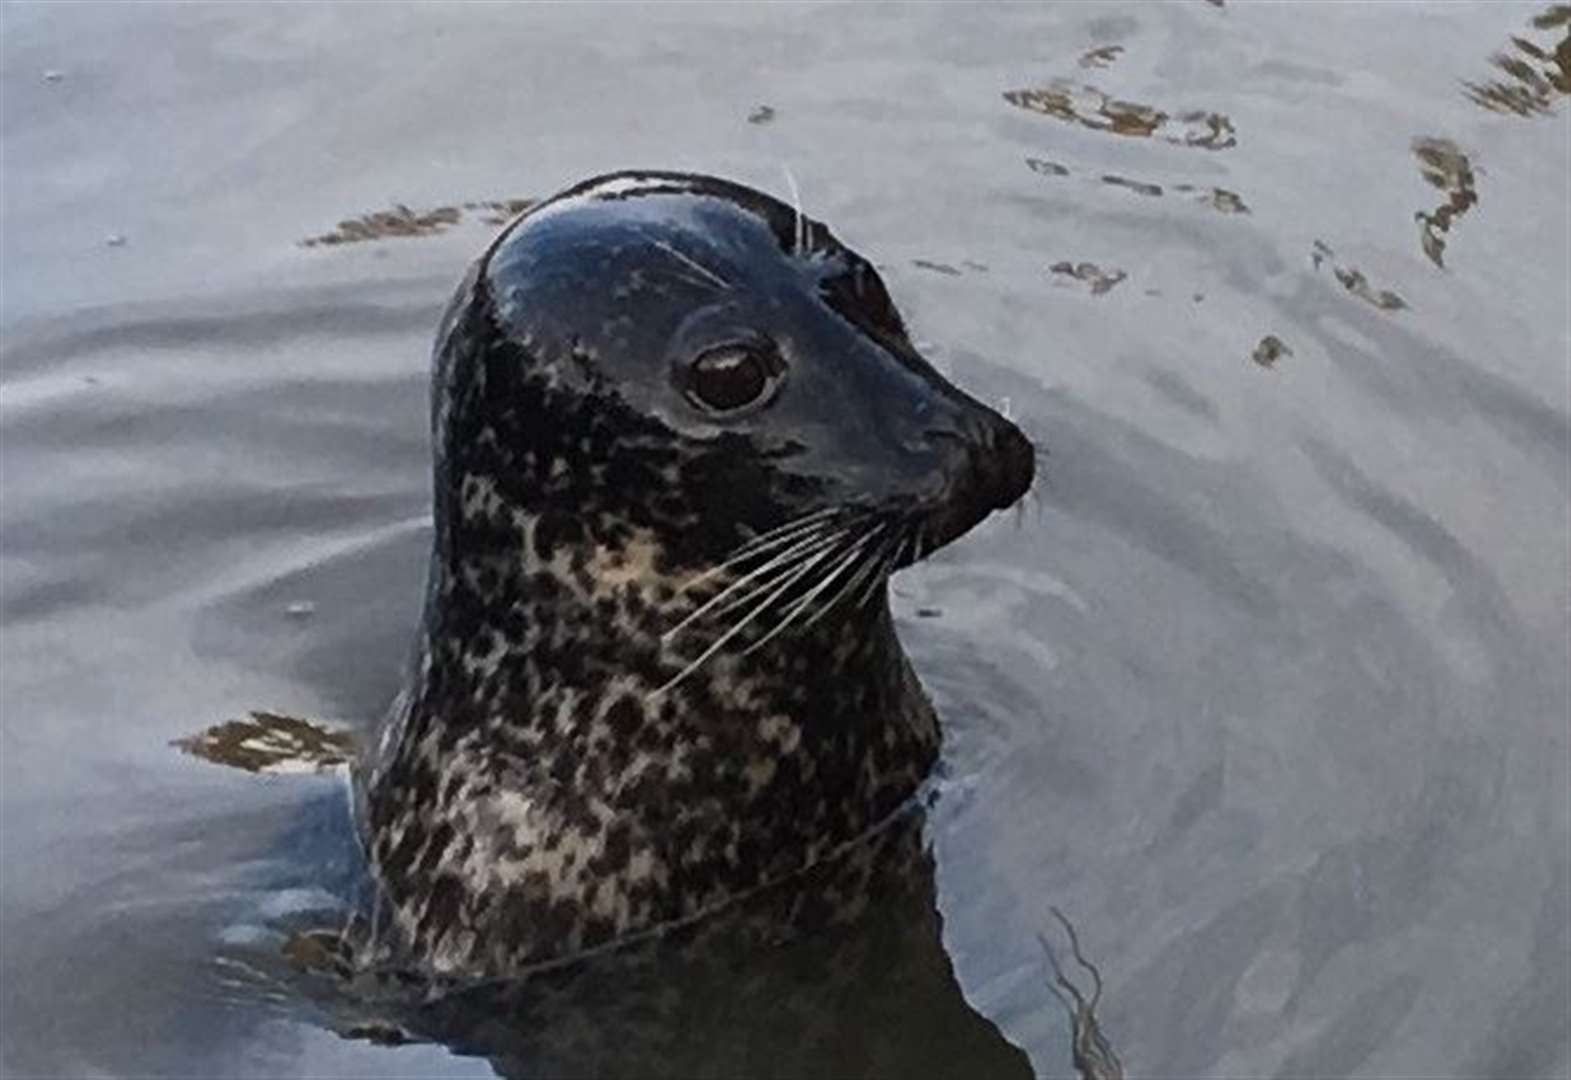 Seal spotted in river